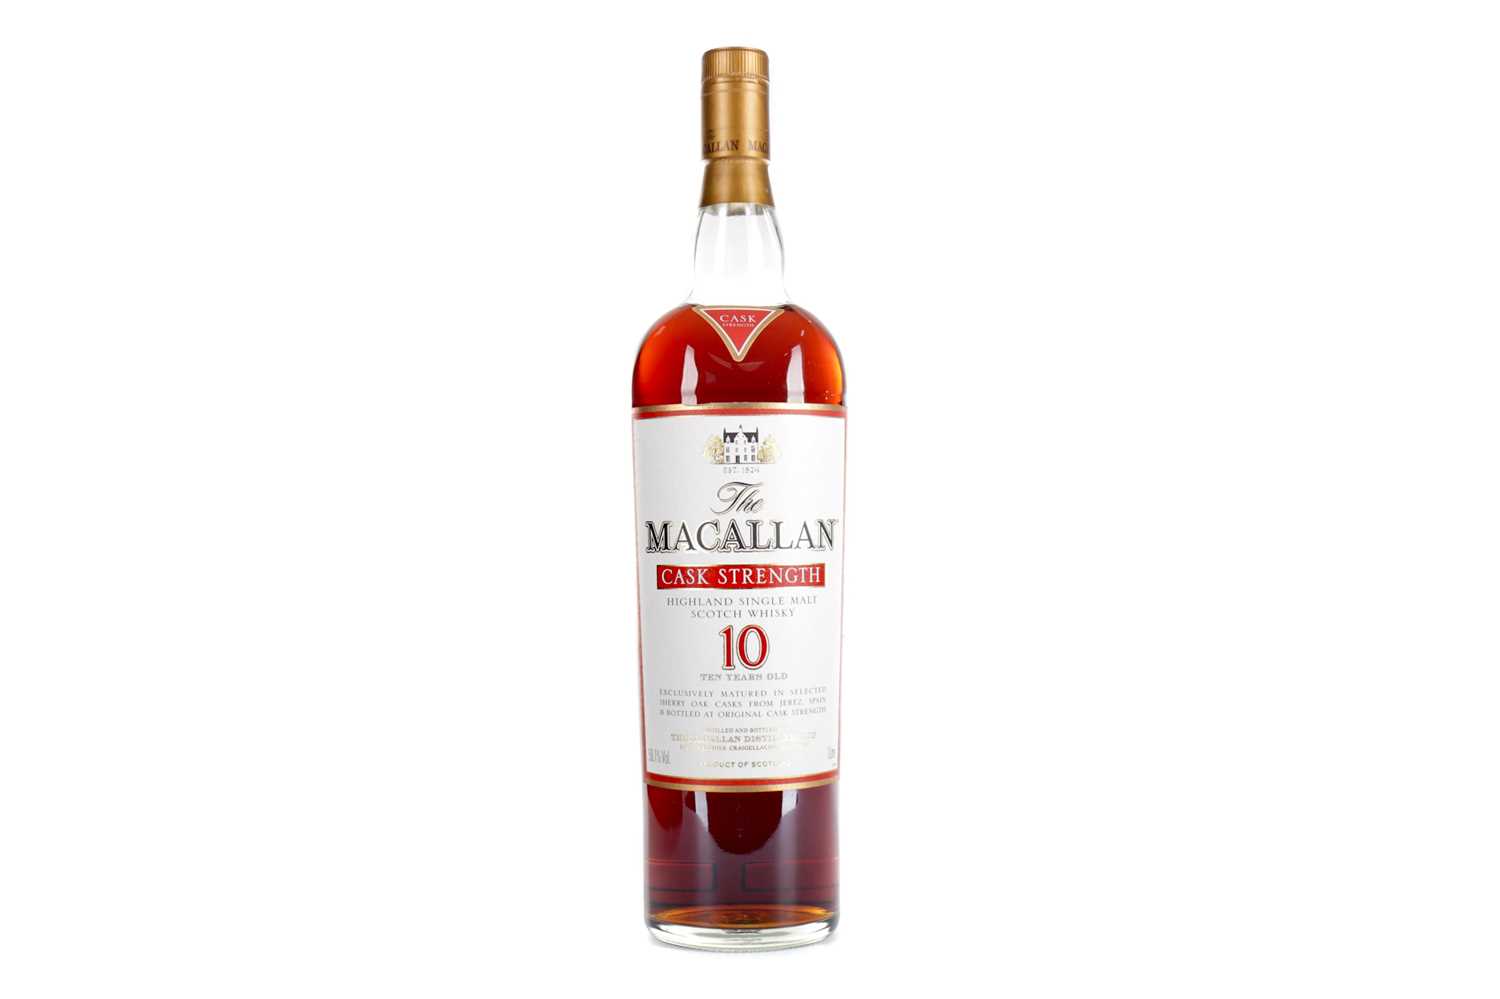 Lot 188 - MACALLAN CASK STRENGTH 10 YEARS OLD - ONE LITRE